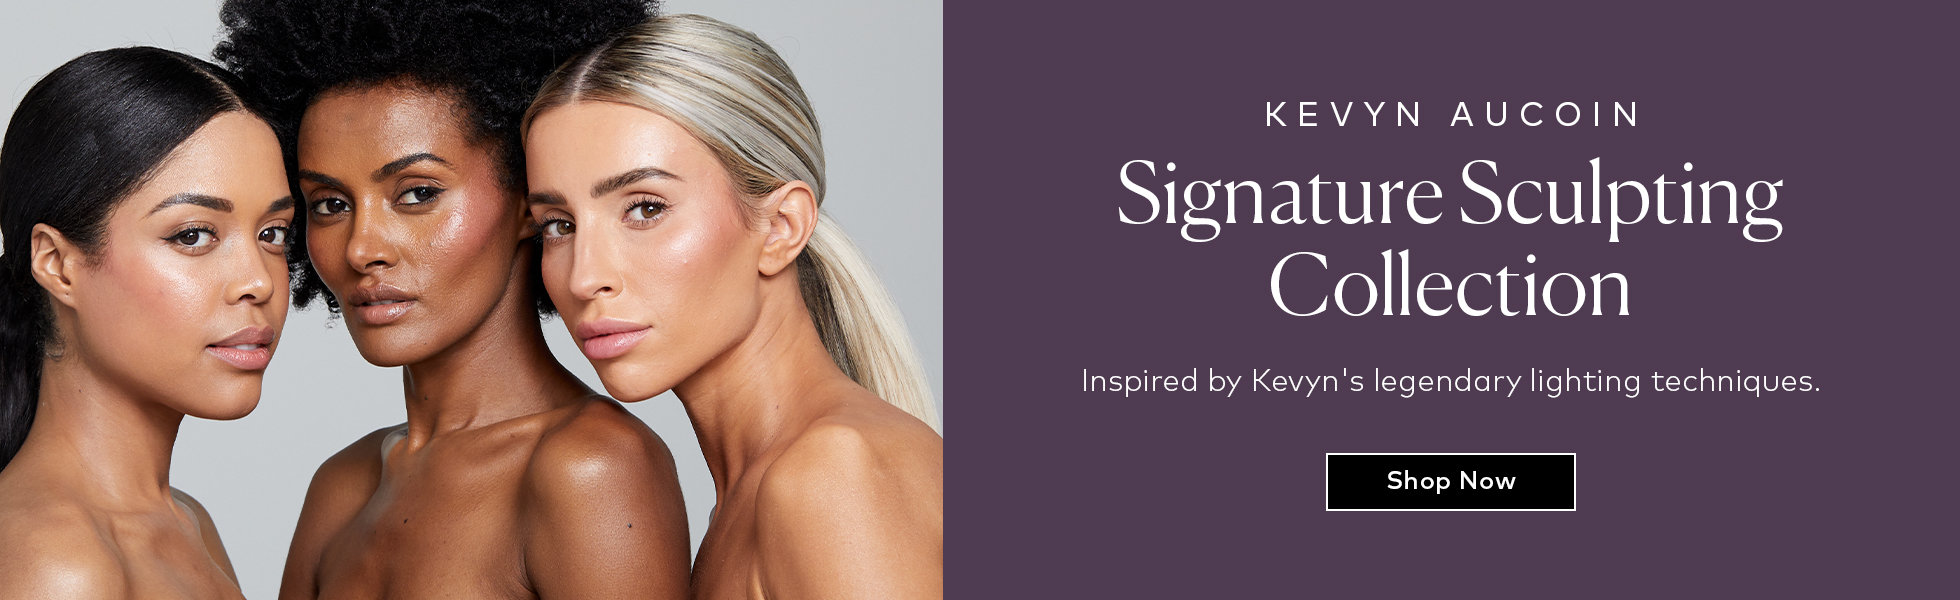 Shop the Kevyn Aucoin Signature Sculpting Collection at Beautylish.com